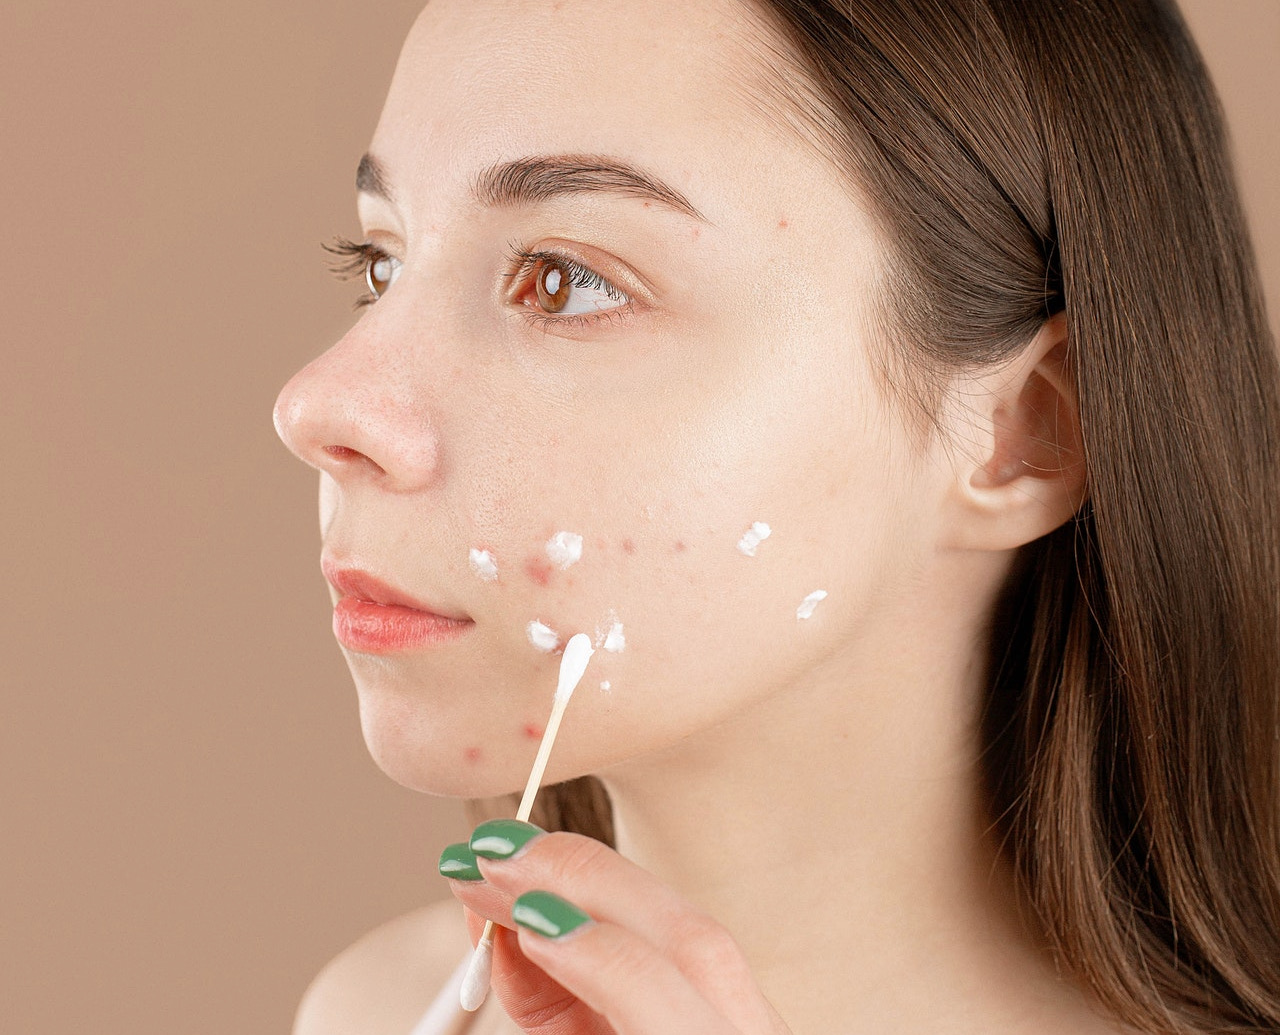 person applying cream to acne